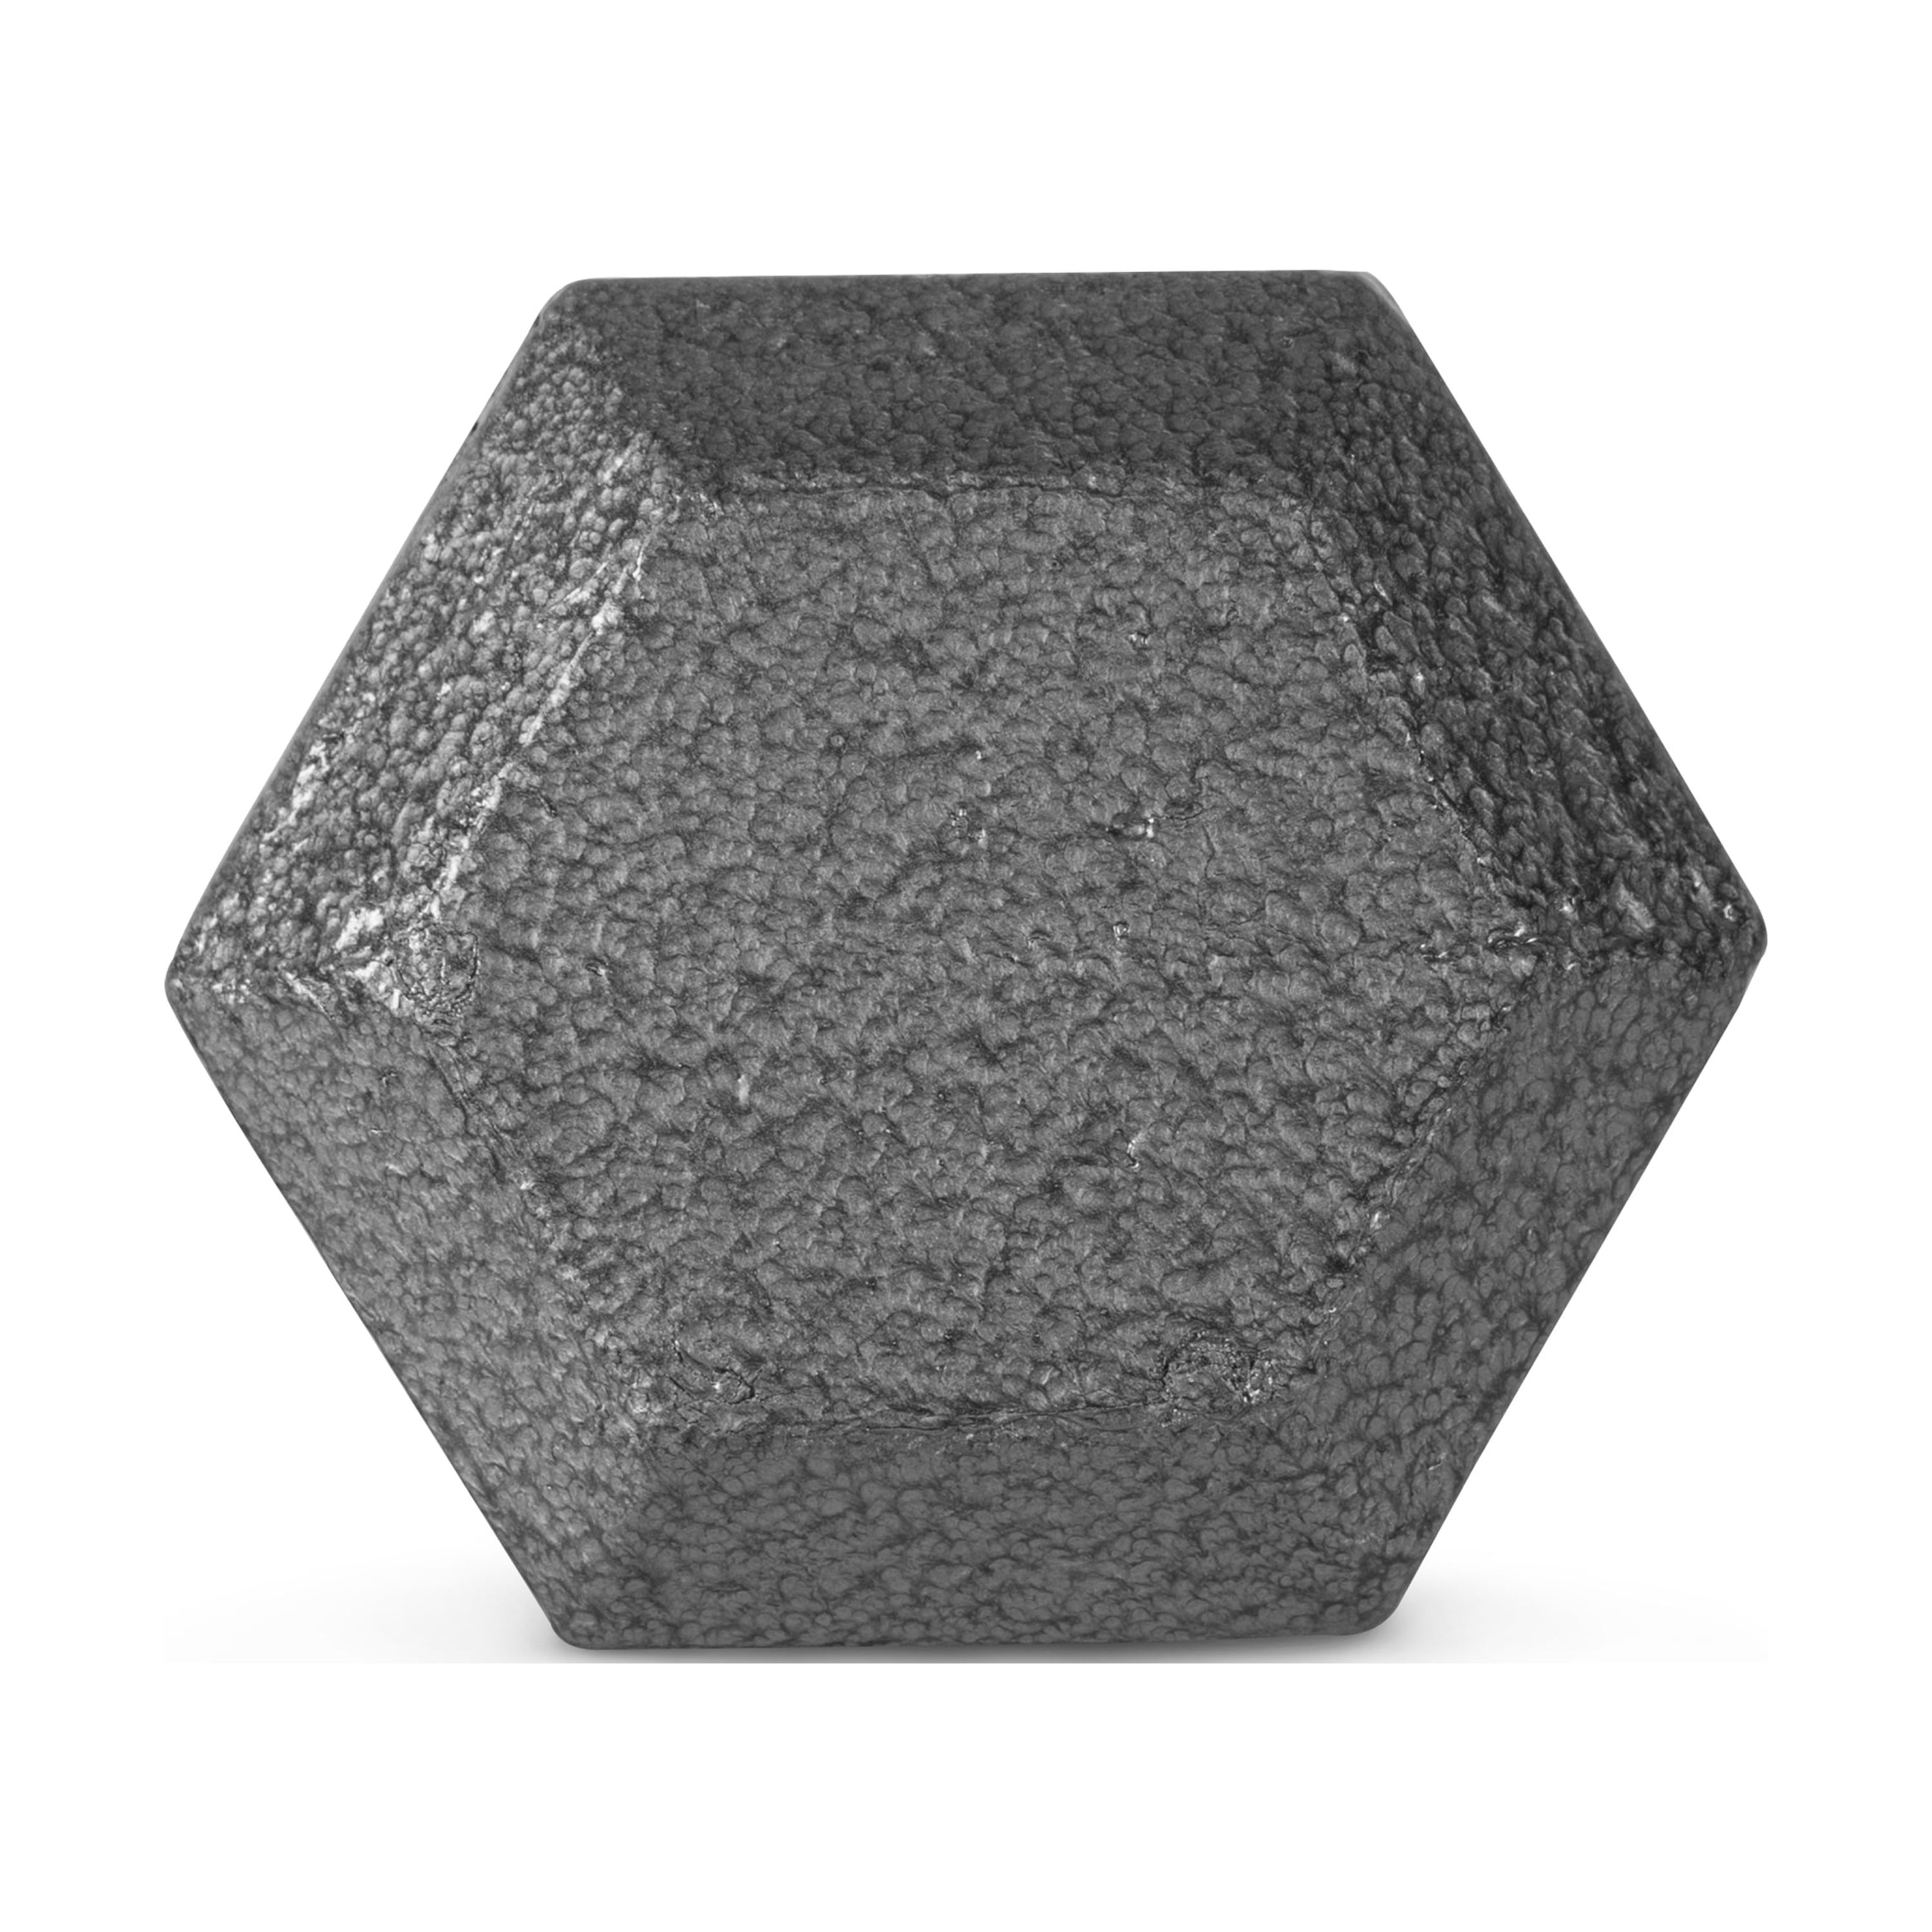 CAP Barbell 40lb Cast Iron Hex Dumbbell, Single - image 4 of 6